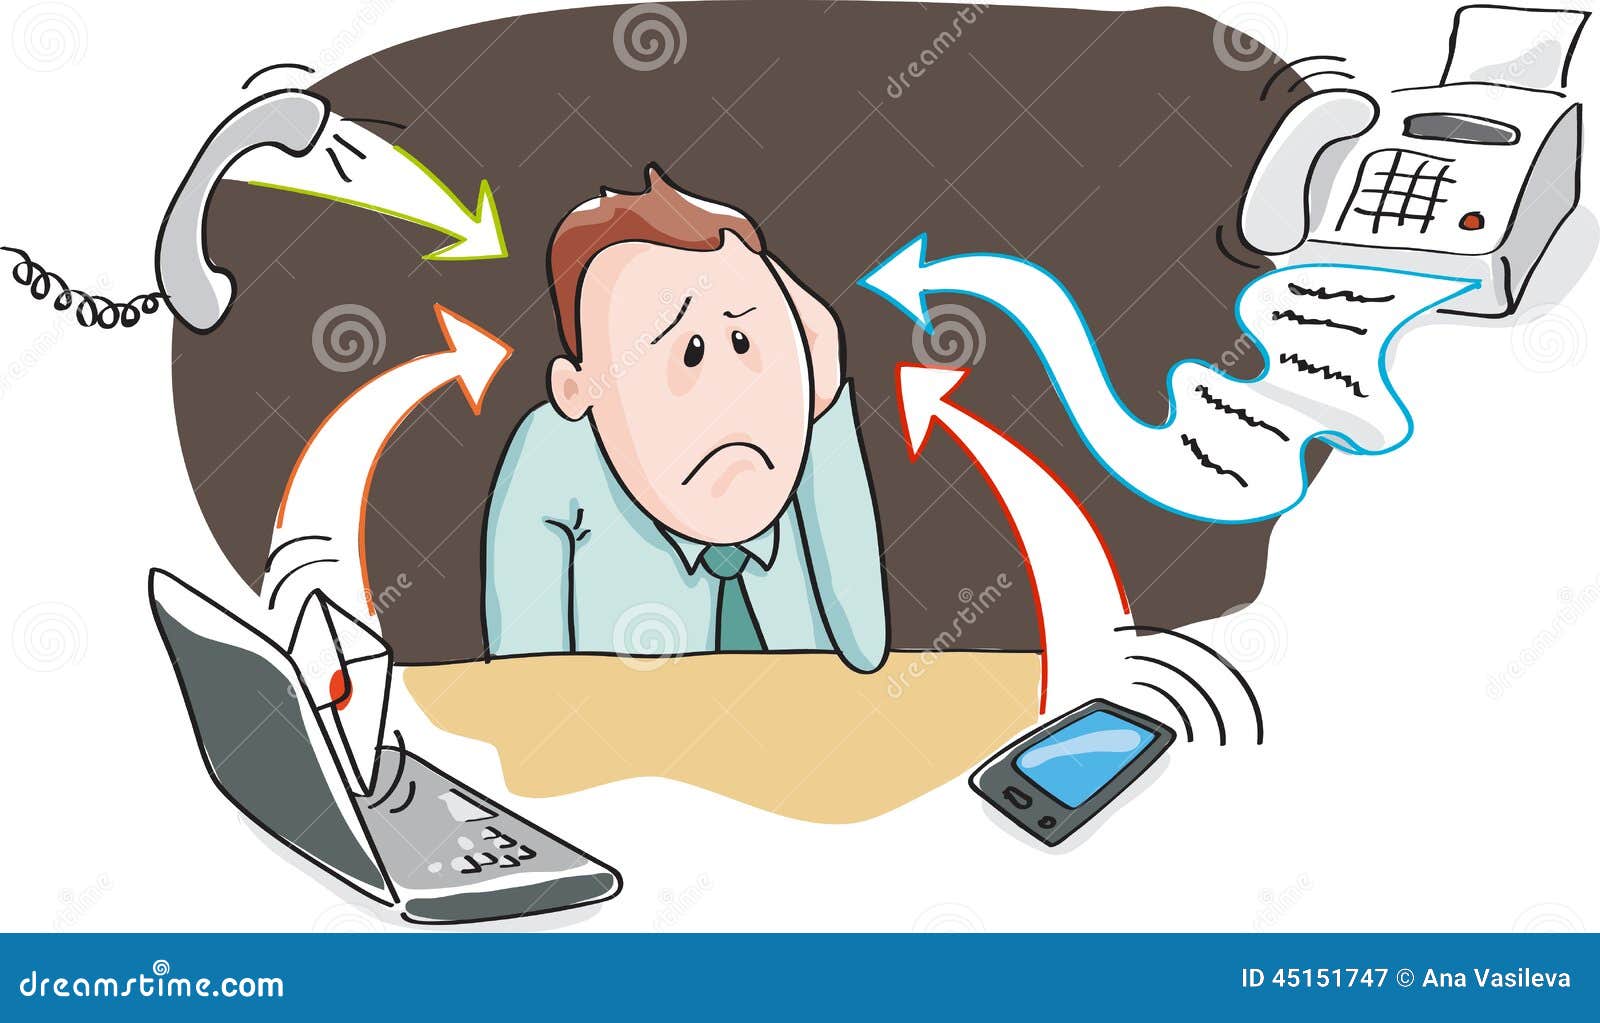 office burnout - information overload by electronic devices